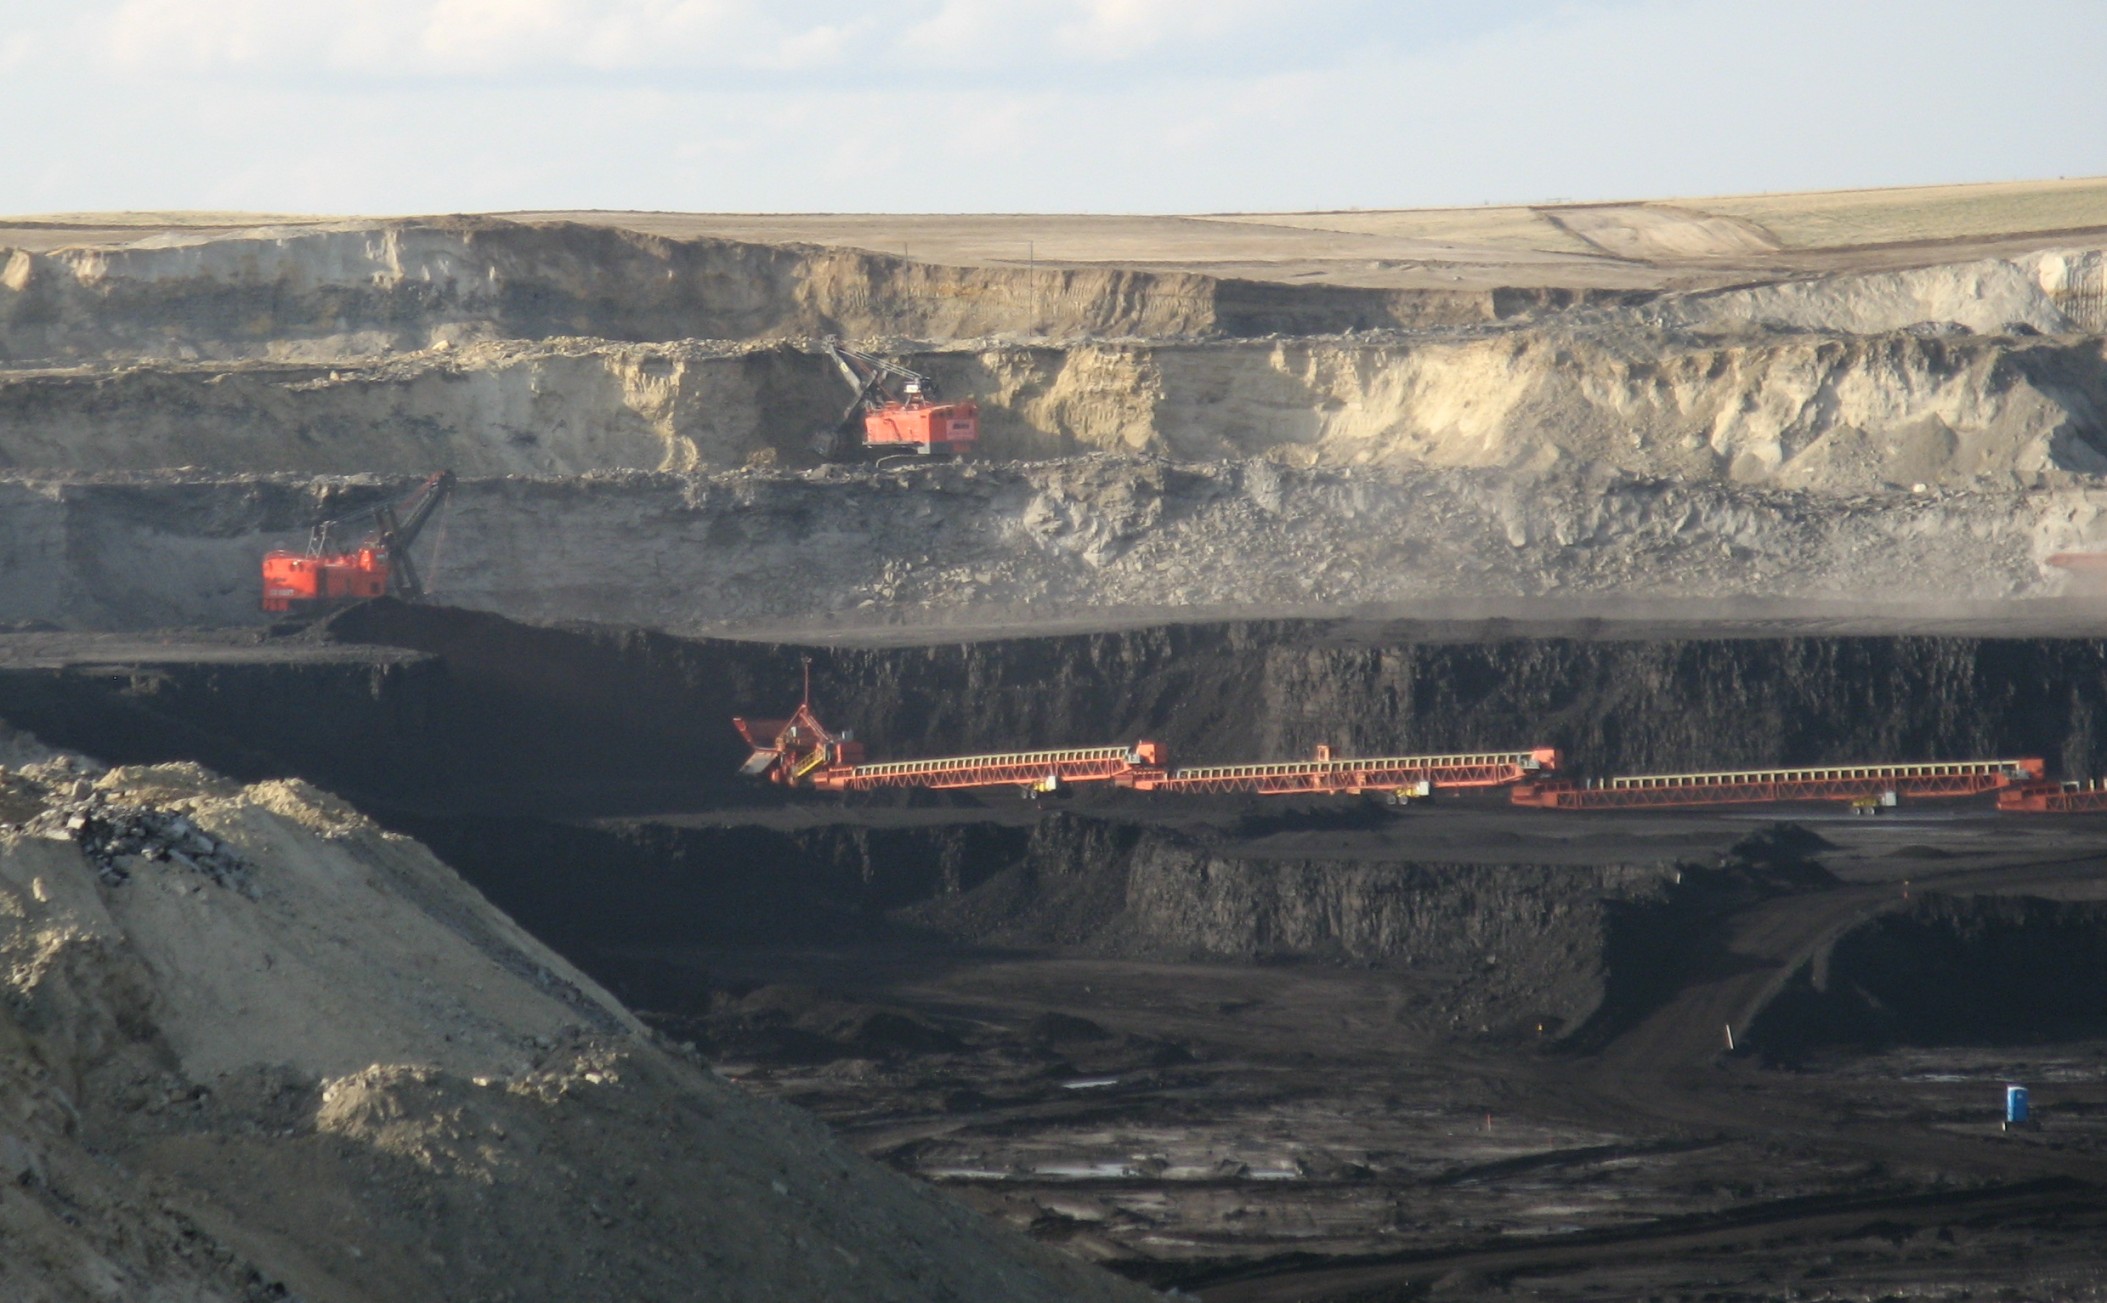 Photograph taken in a coal mine in the Powder River Basin of Wyoming. The photo shows the wall and floor of an open-pit mine with several levels. Mining machinery, including two draglines, can be seen on three of the levels; the machinery is pained orange. The lower levels of the mine appear black, the upper levels are light gray to beige.